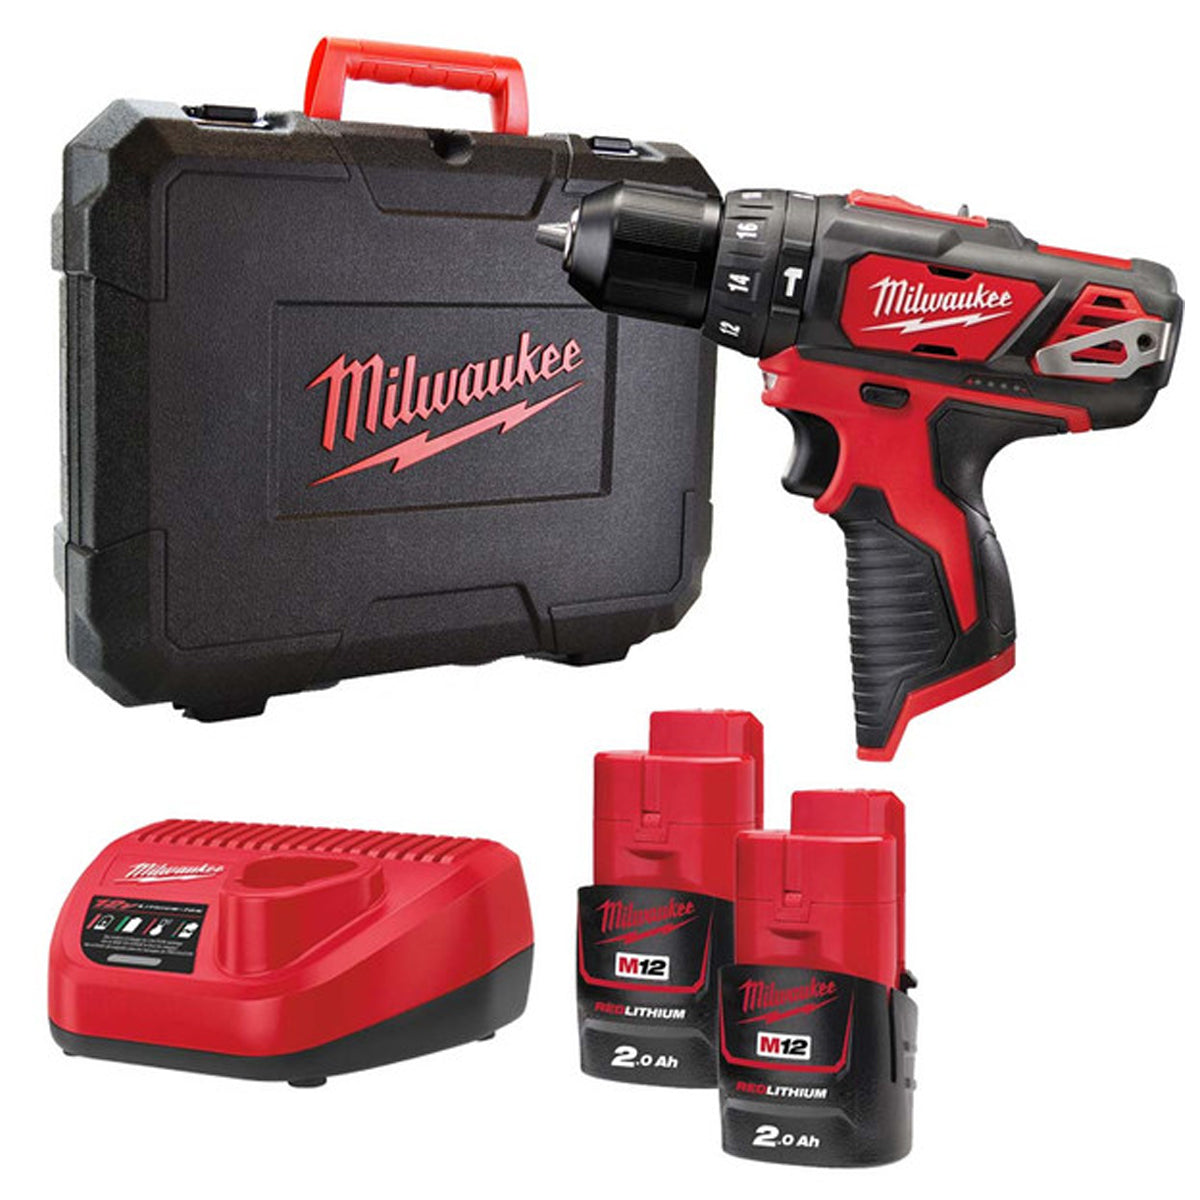 Milwaukee M12 BPD-202C 12V Combi Drill with 2 x 2.0Ah Batteries Charger & Case